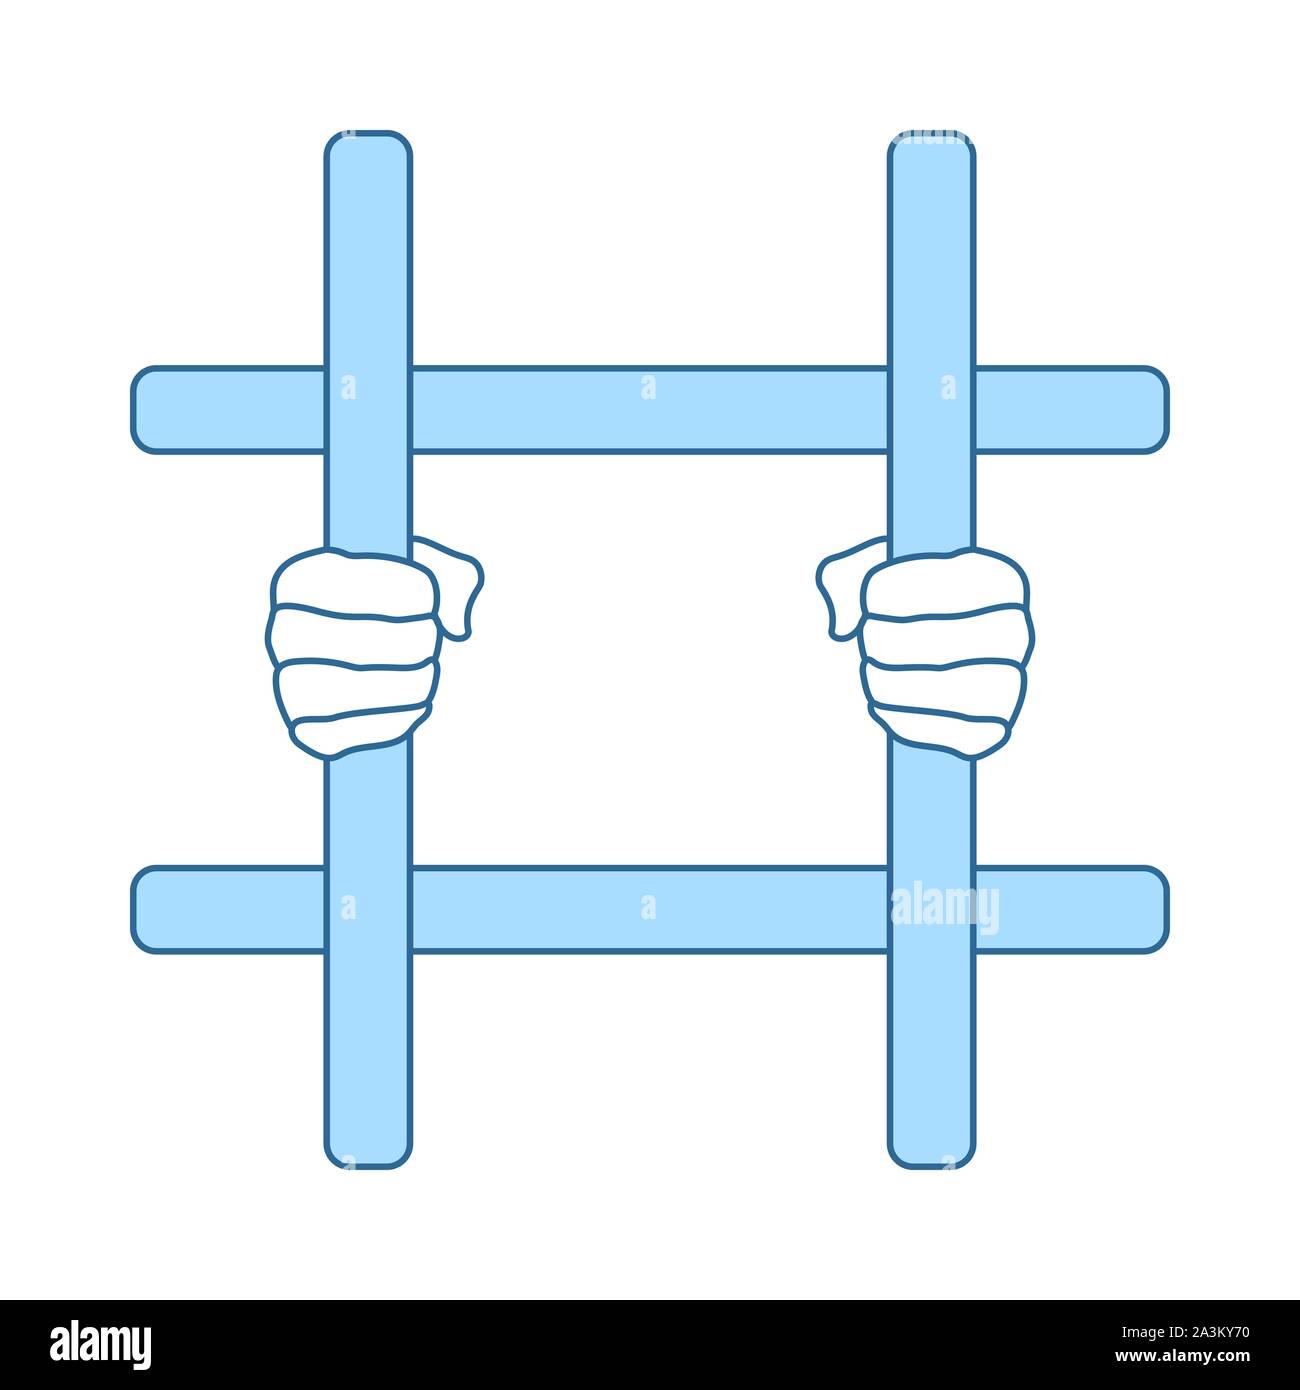 Hands Holding Prison Bars Icon. Thin Line With Blue Fill Design. Vector Illustration. Stock Vector